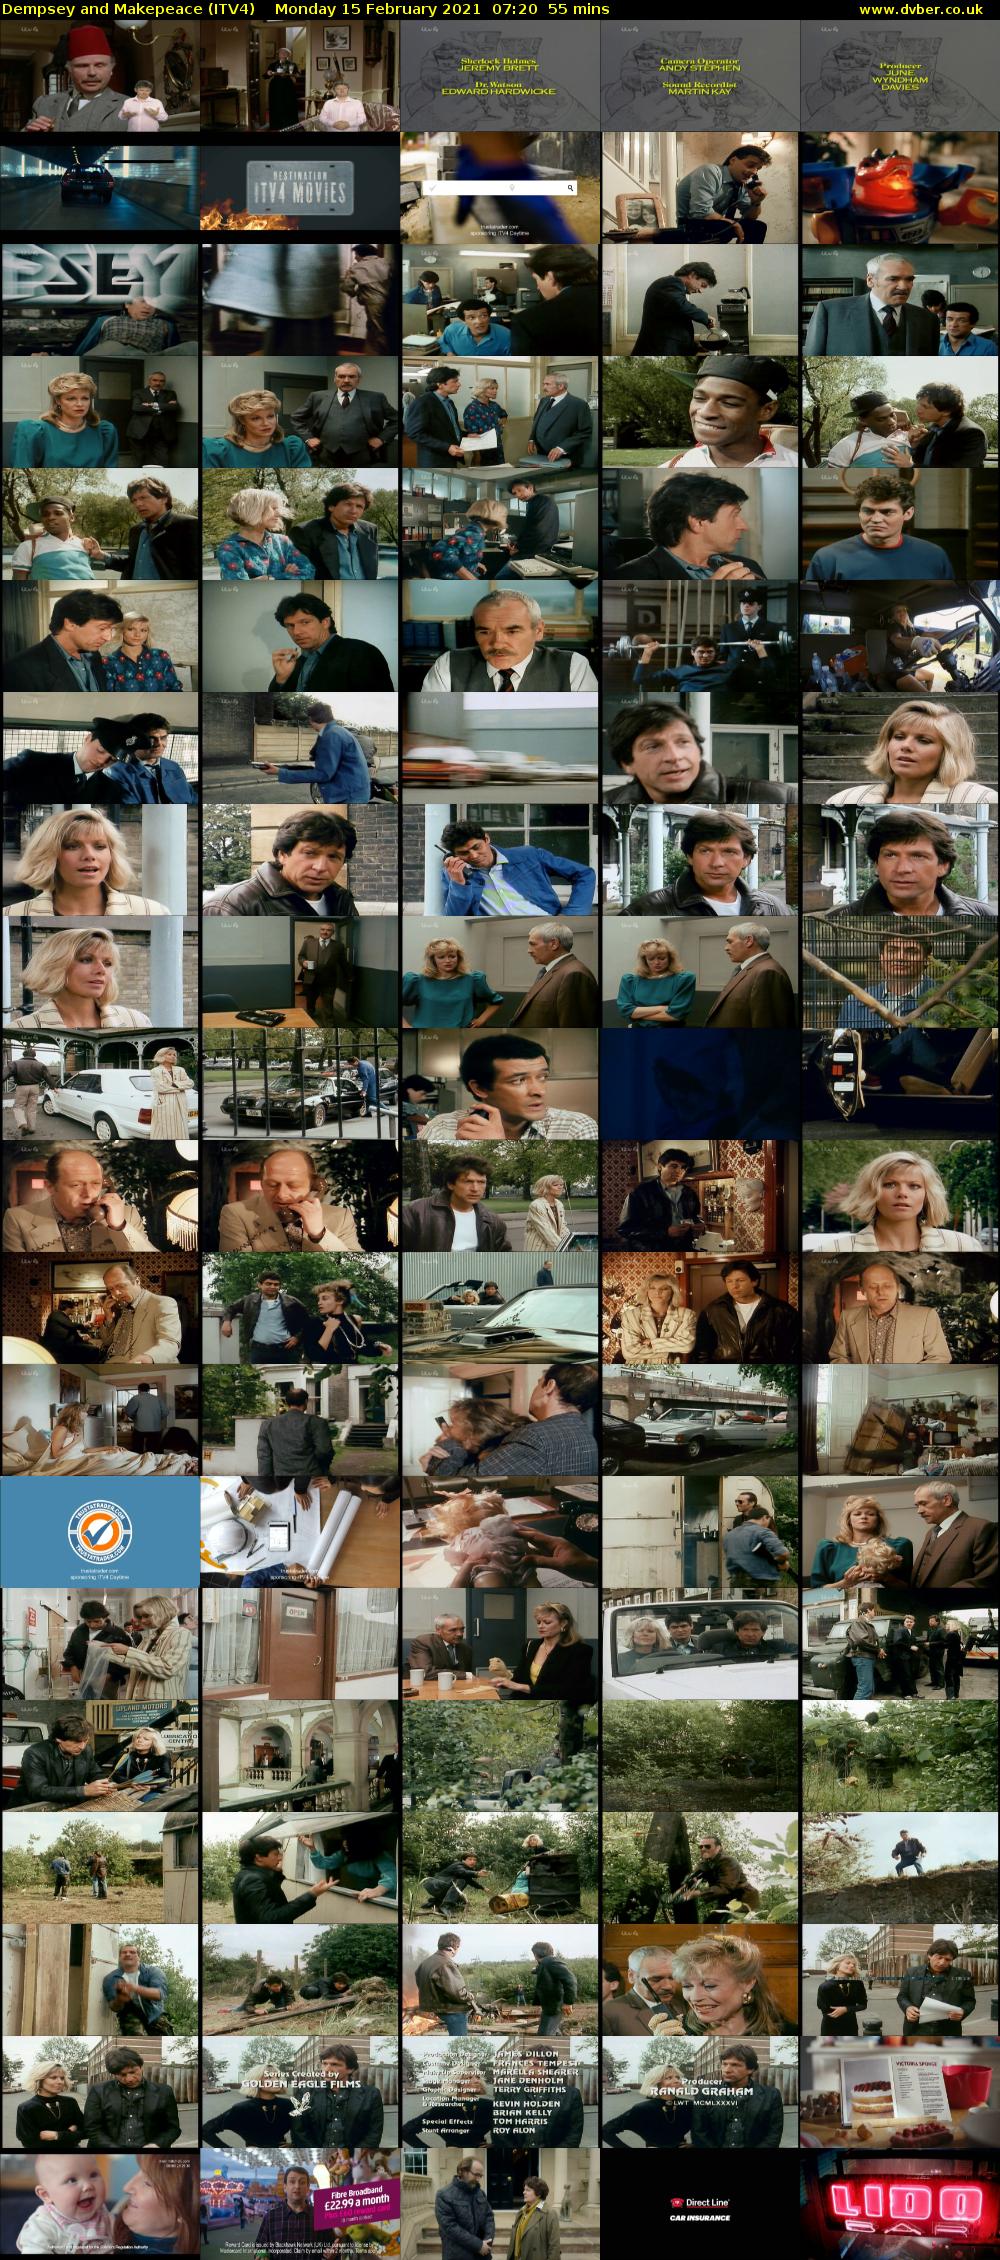 Dempsey and Makepeace (ITV4) Monday 15 February 2021 07:20 - 08:15